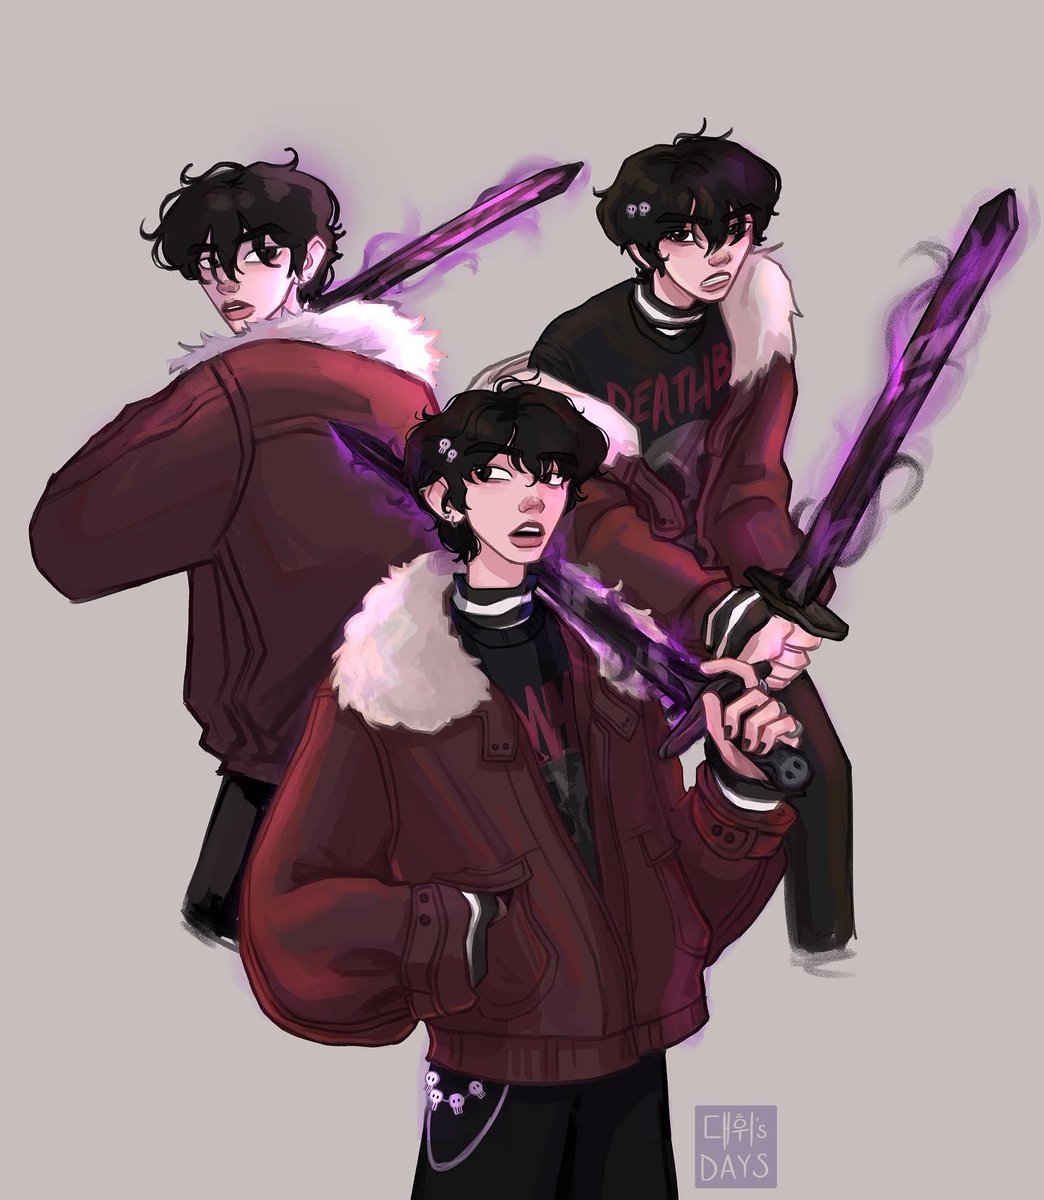 「nico di angelo and his boys #PercyJackso」|sophie🕺のイラスト